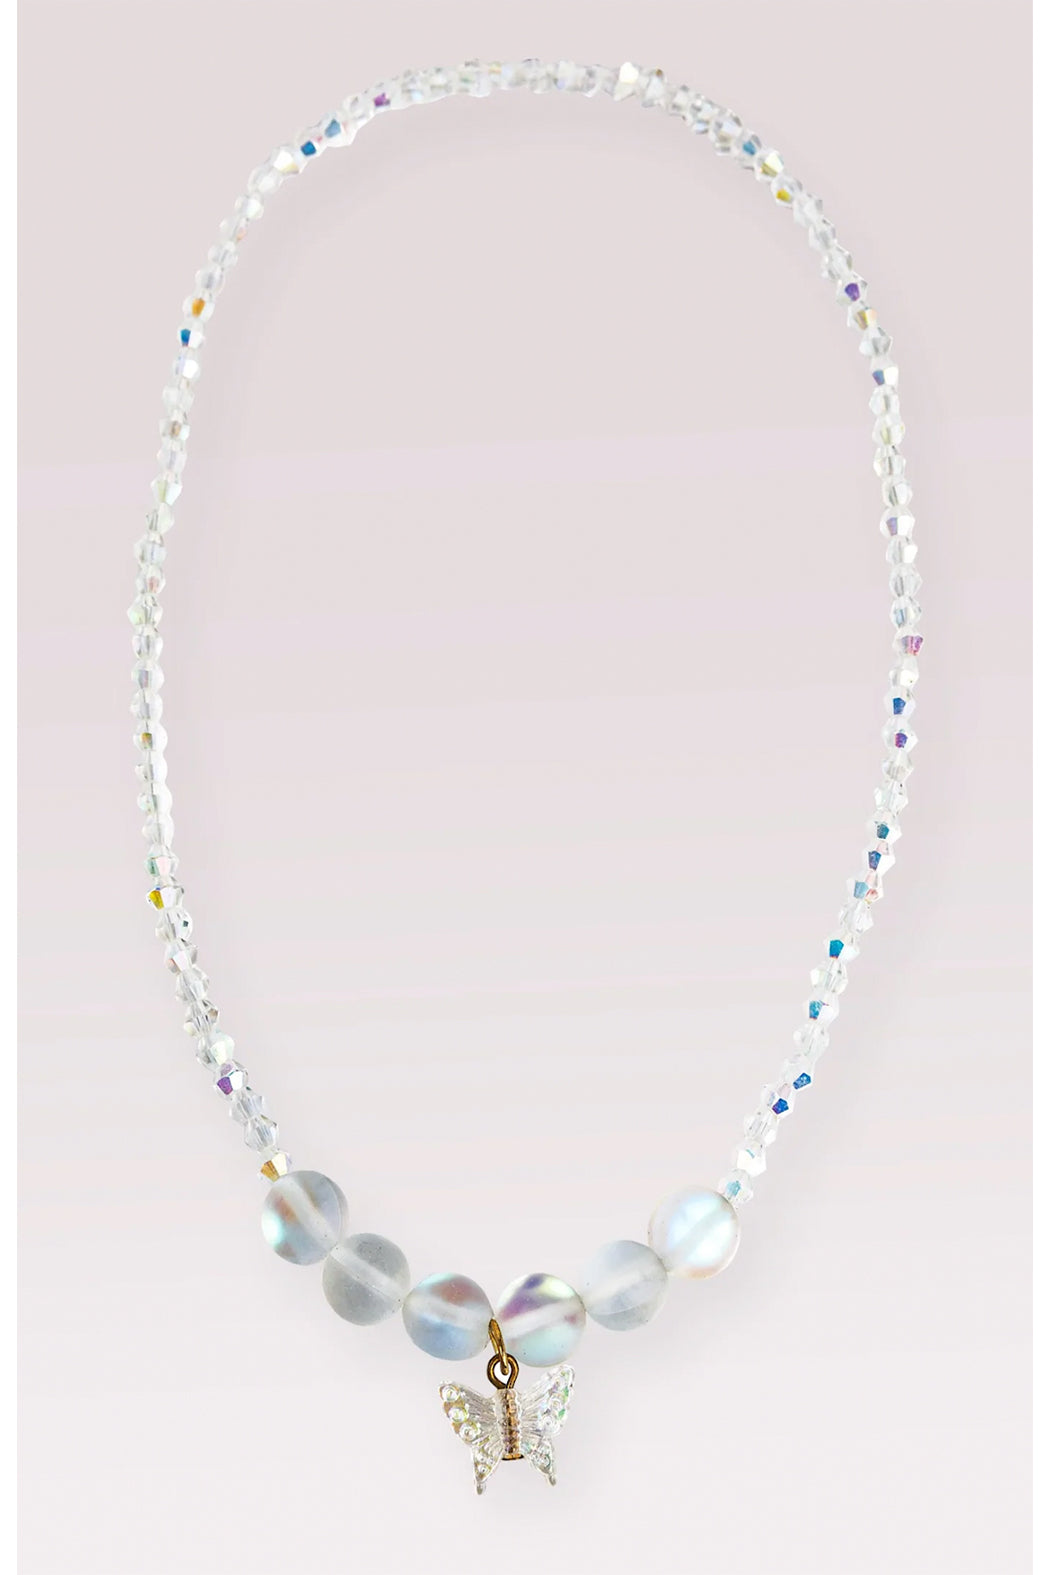 Great Pretenders Boutique Holo Crystal Necklace